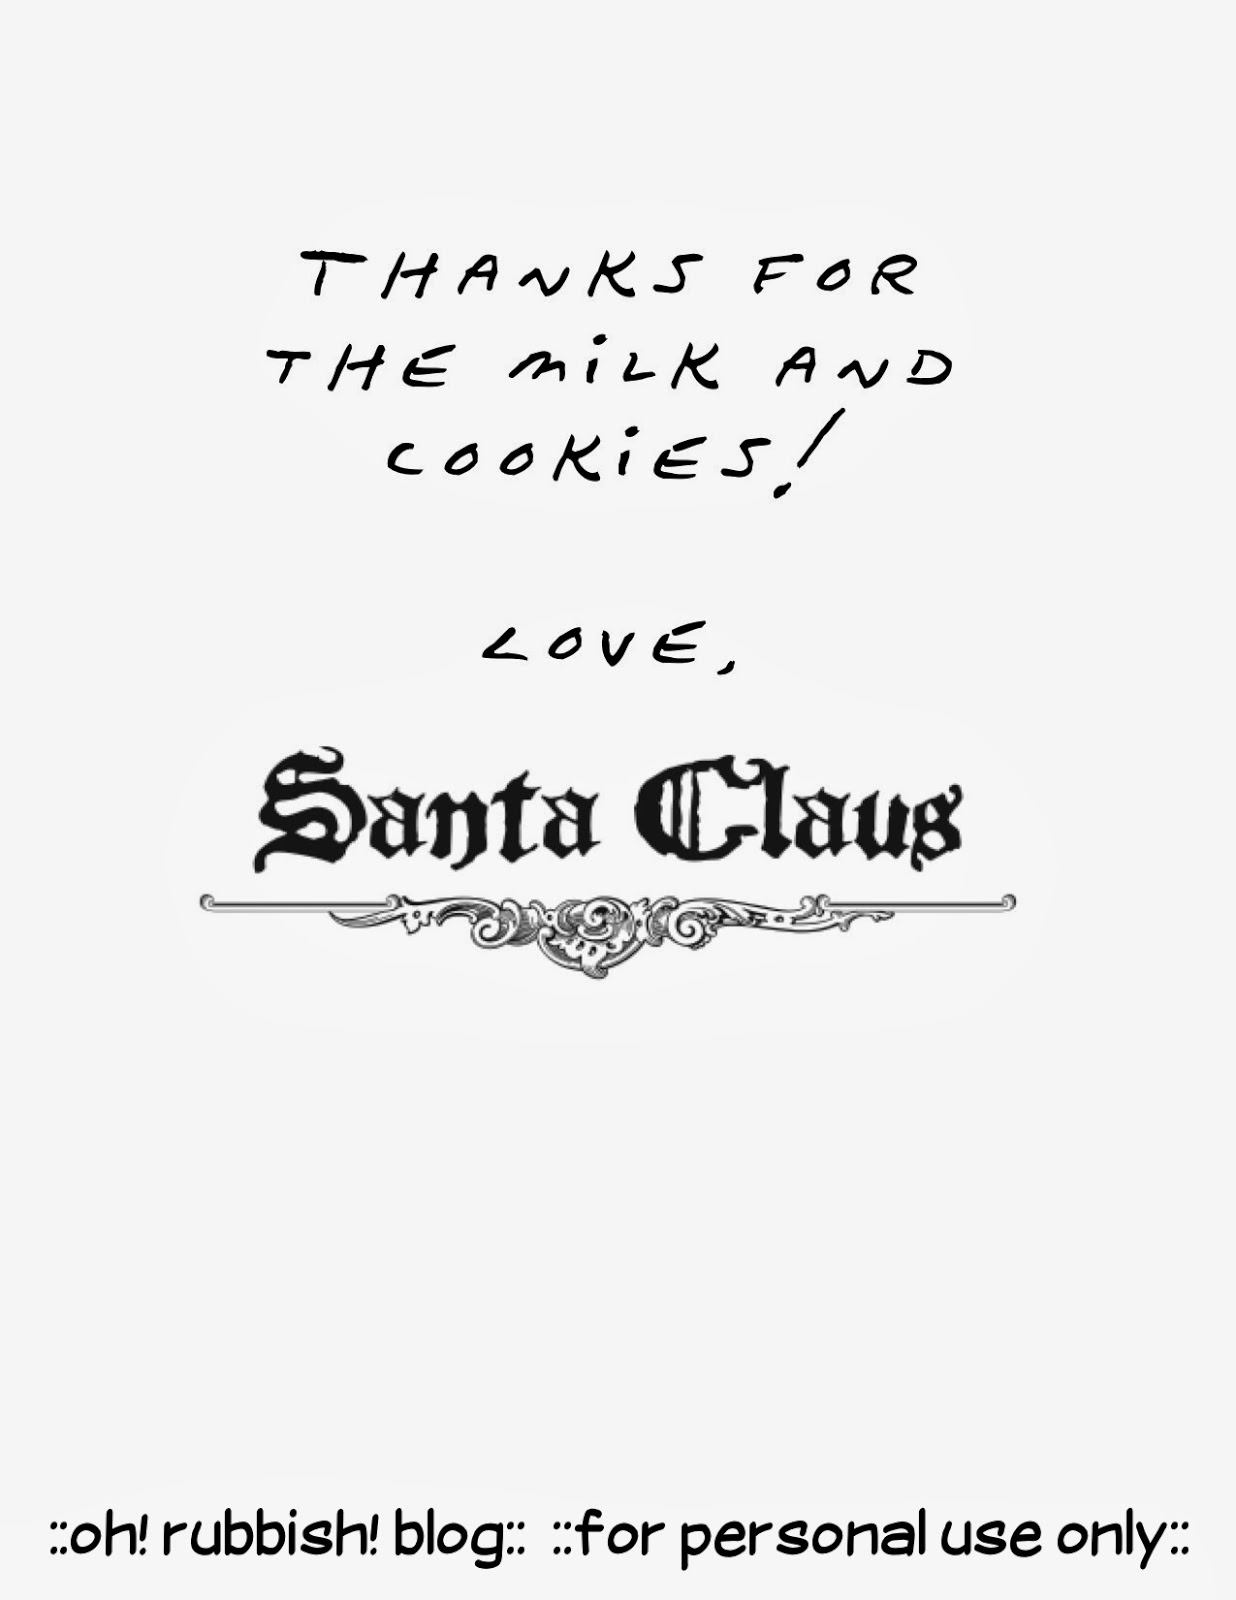 thank you letter from santa for milk and cookies